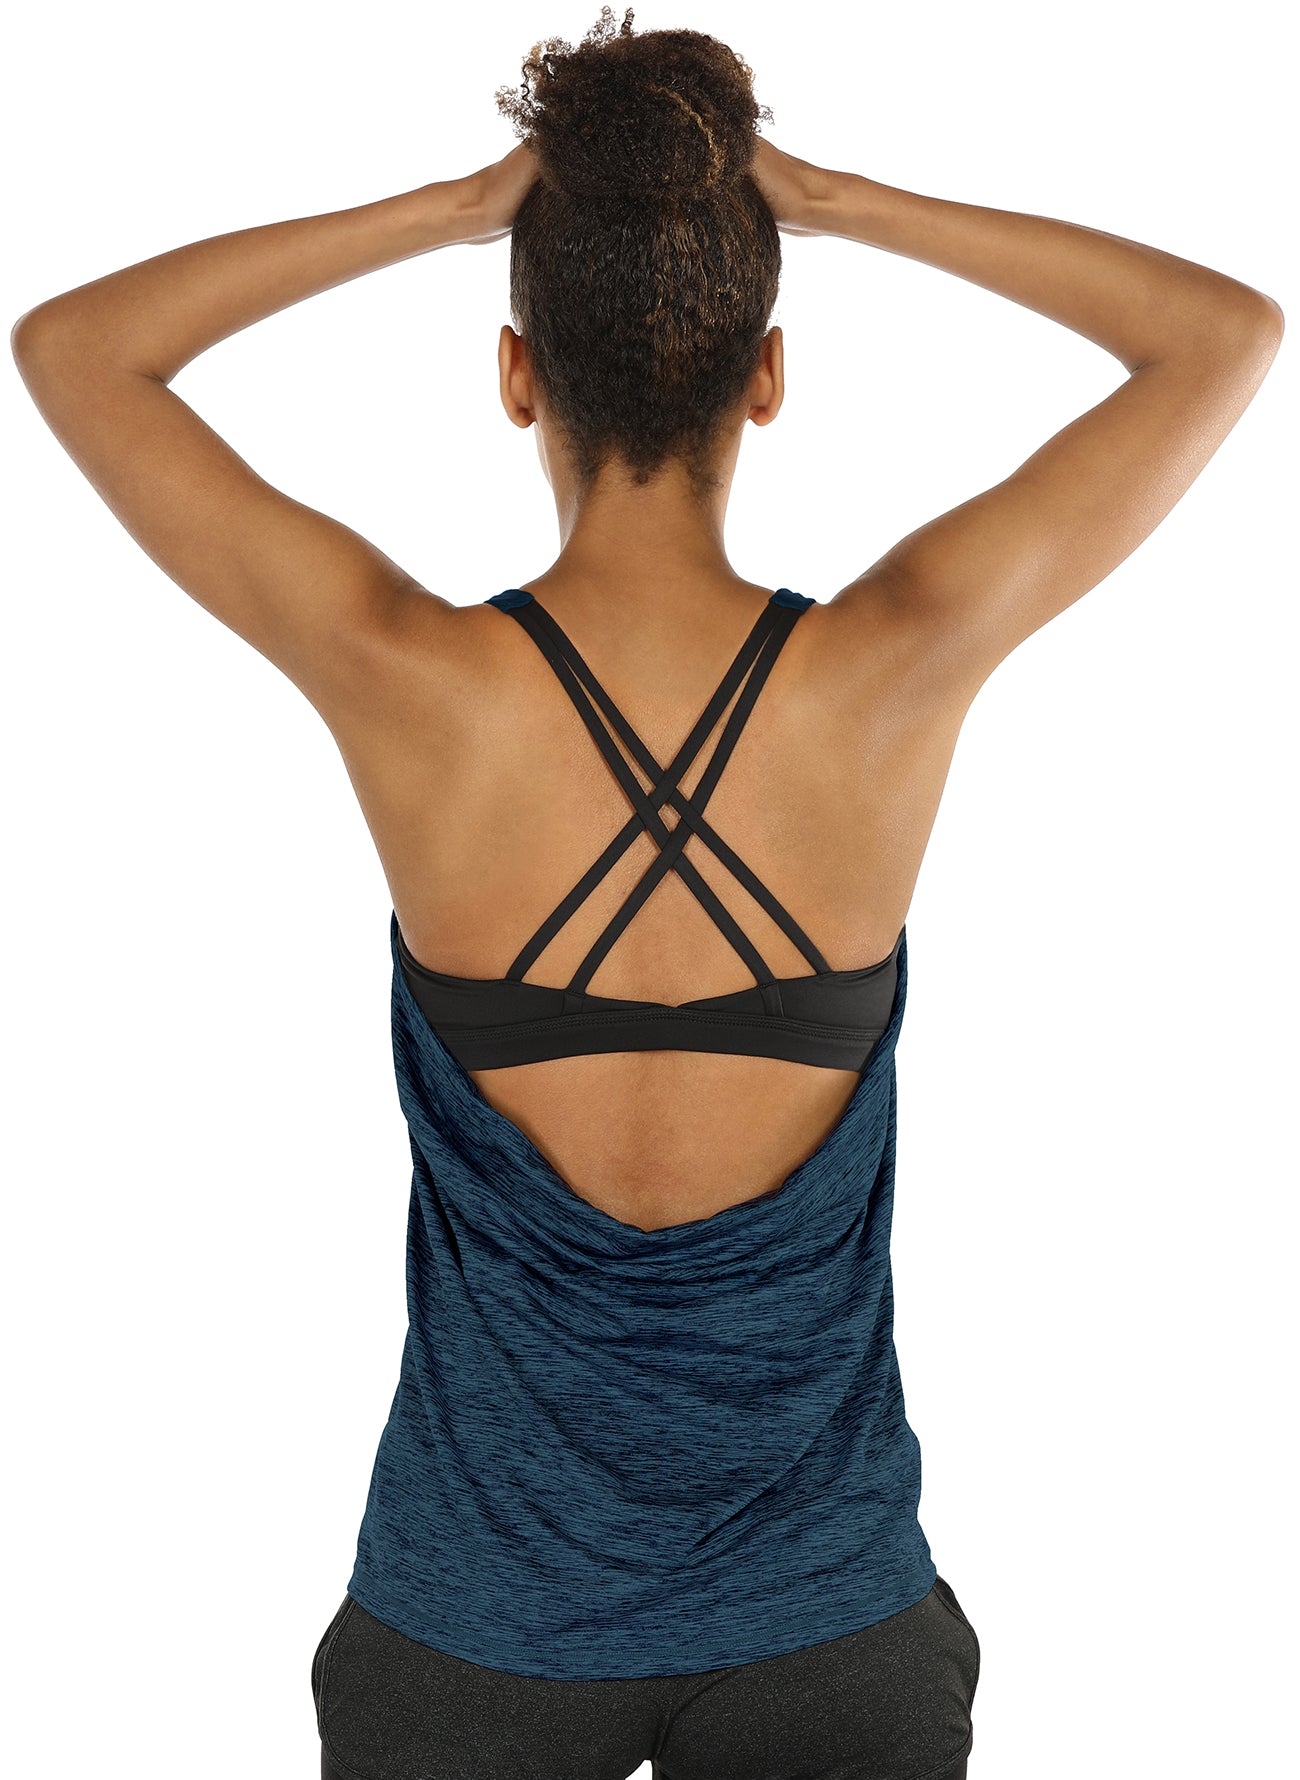  icyzone Workout Tank Tops Built in Bra - Women's Strappy  Athletic Yoga Tops, Exercise Running Gym Shirts (S, Dusk Blue) : Clothing,  Shoes & Jewelry